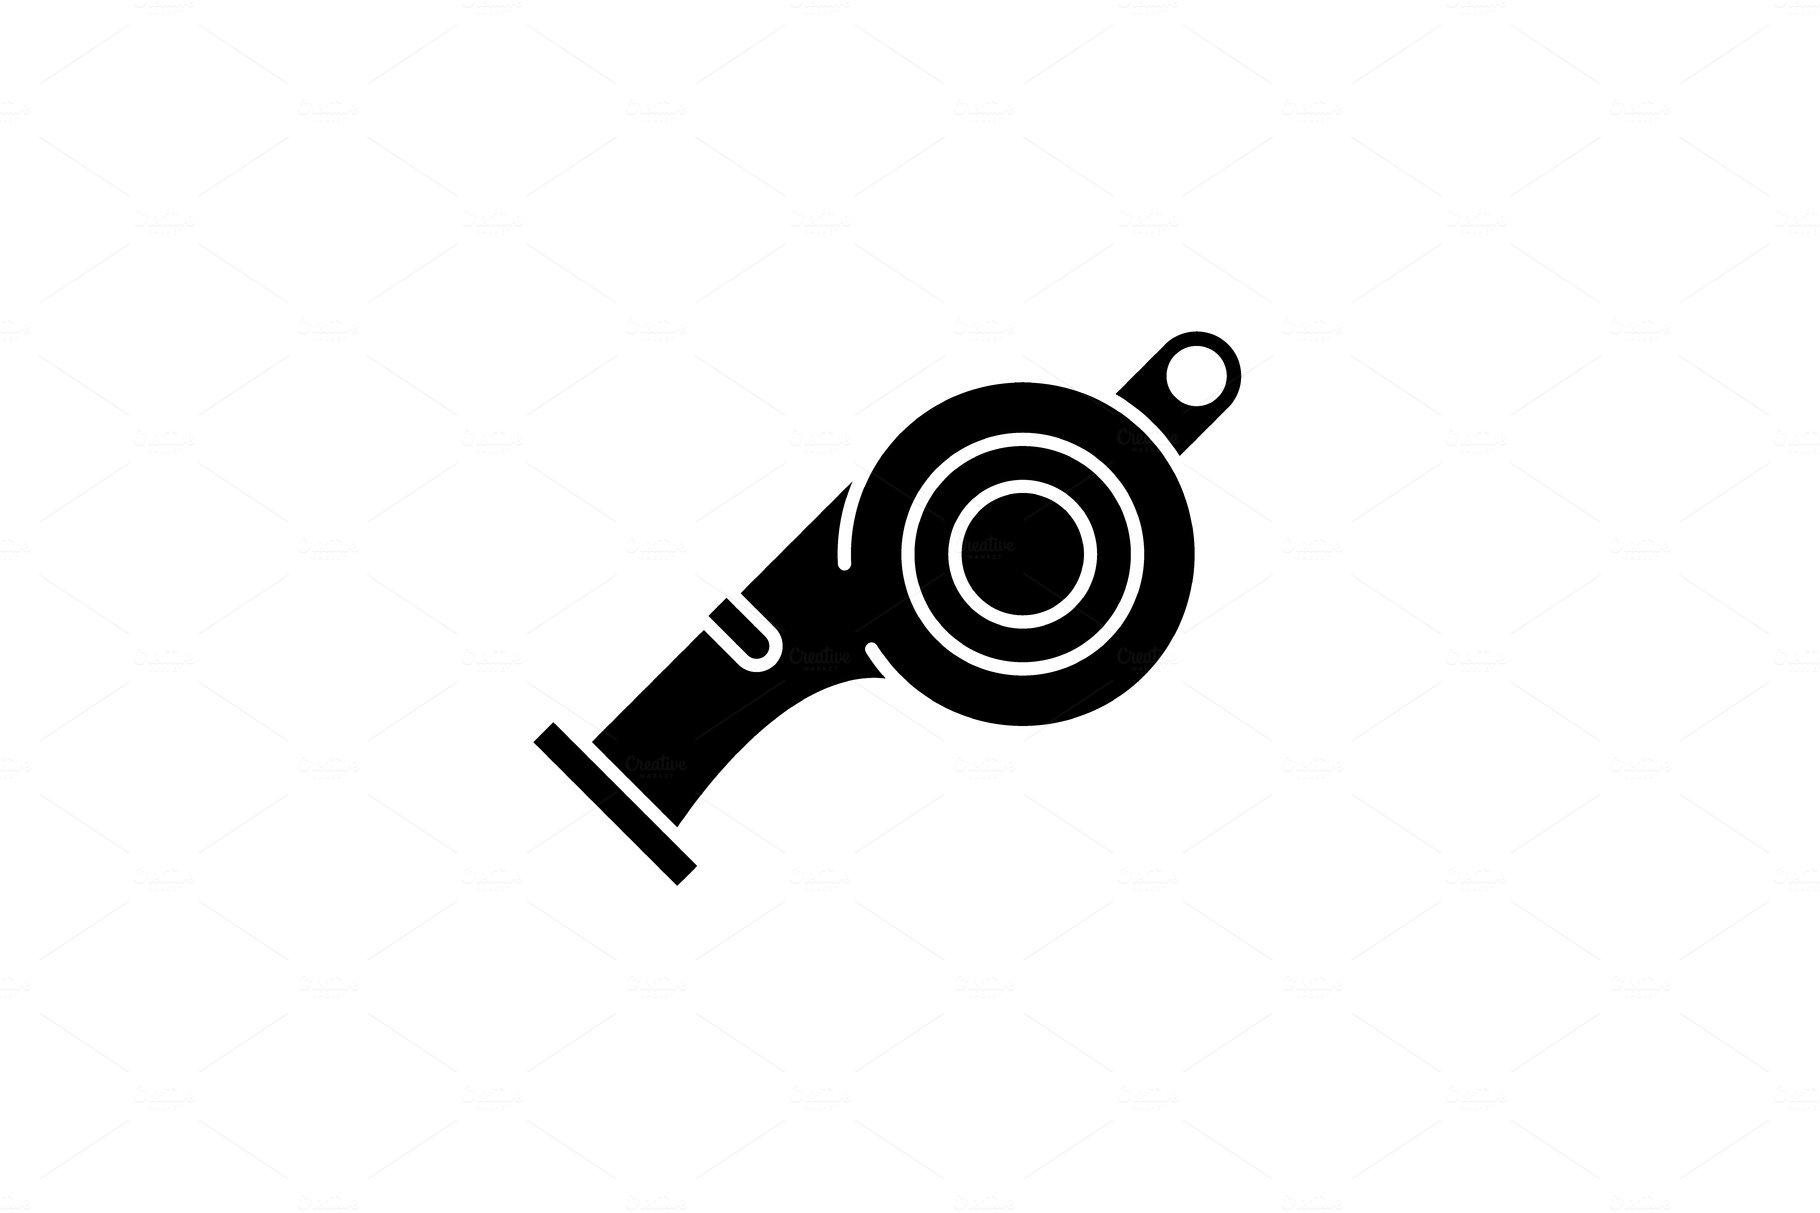 Whistle black icon, vector sign on cover image.